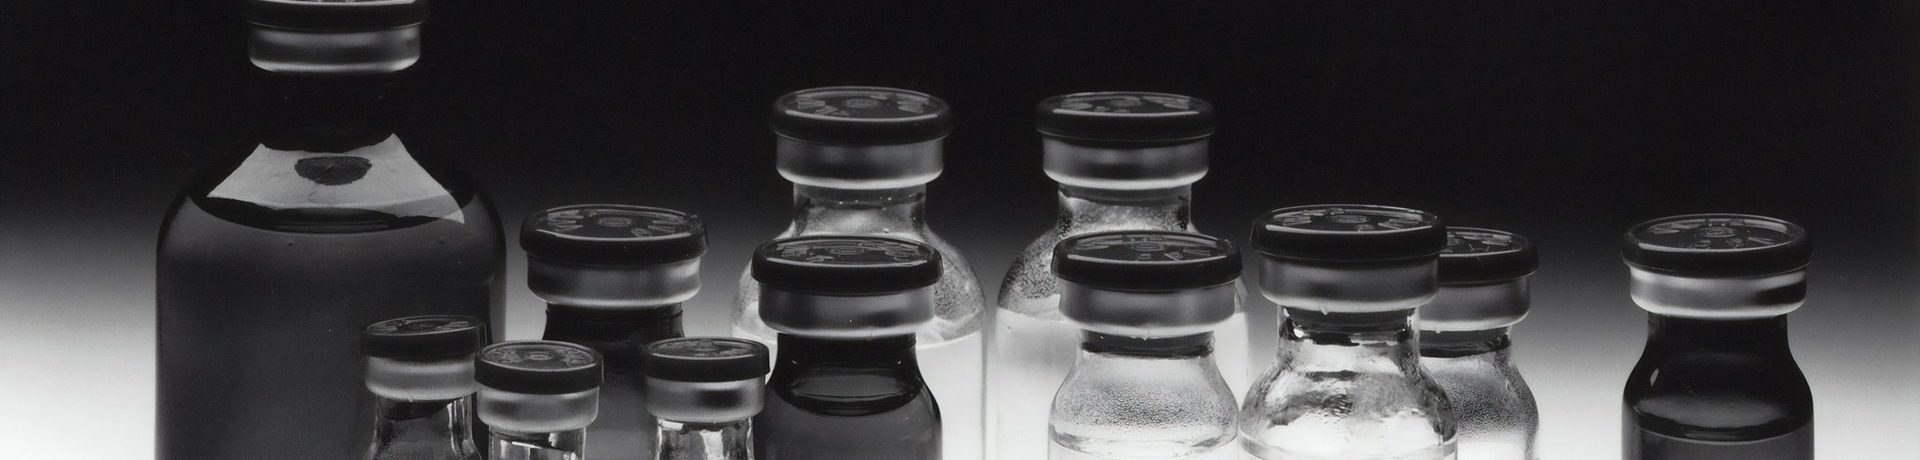 Chemotherapy vials representing an employee with cancer facing discrimination at work